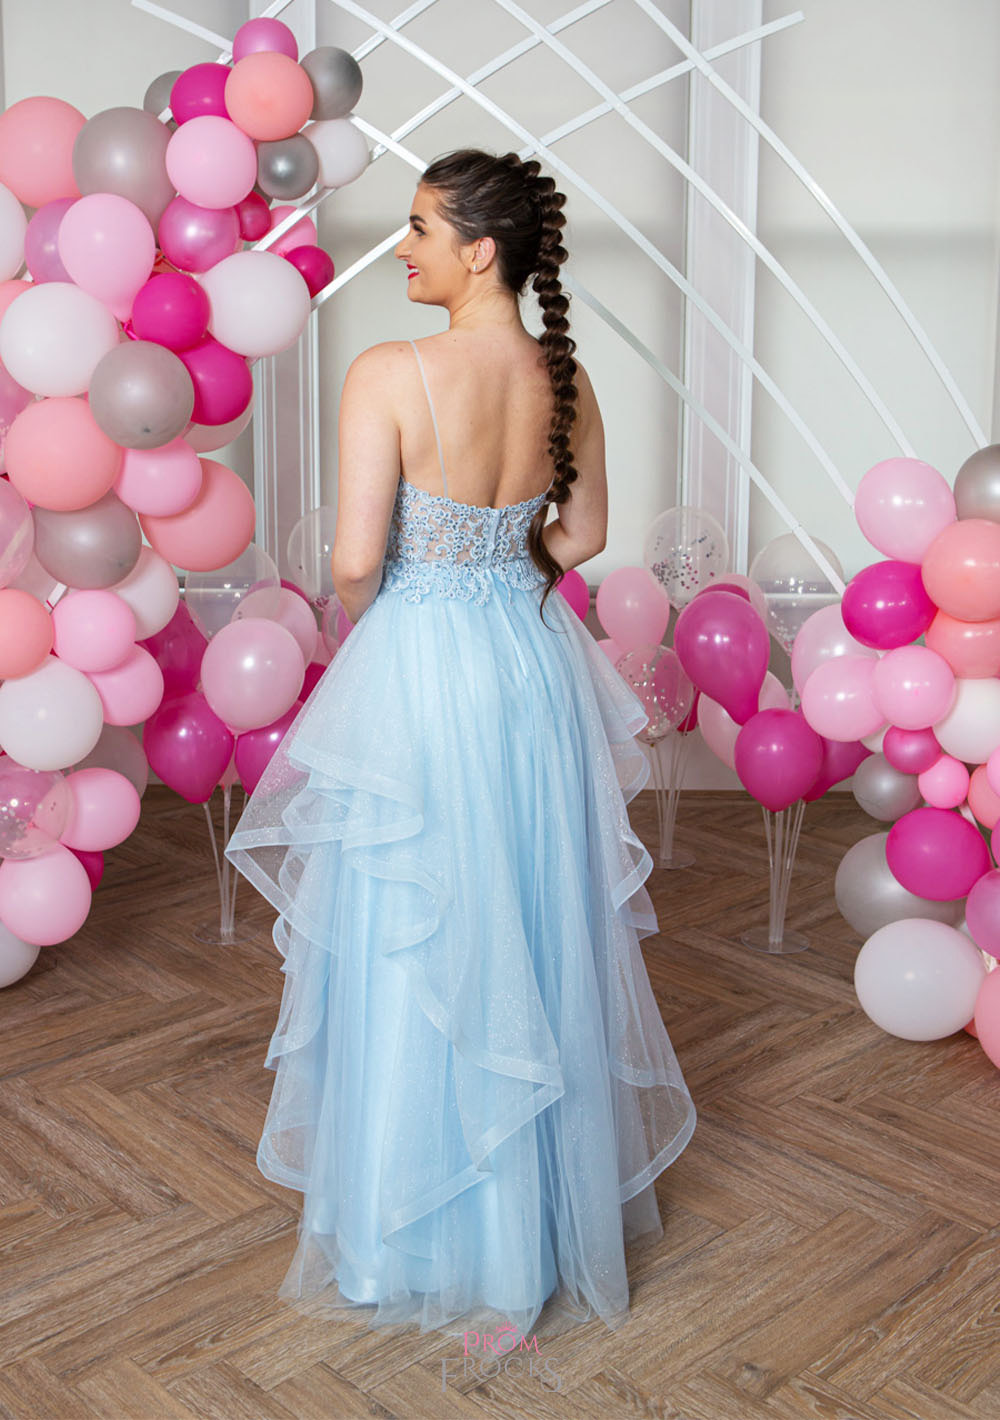 The Rachael Dress from MK Prom in Porcelain Sky blue (Back)